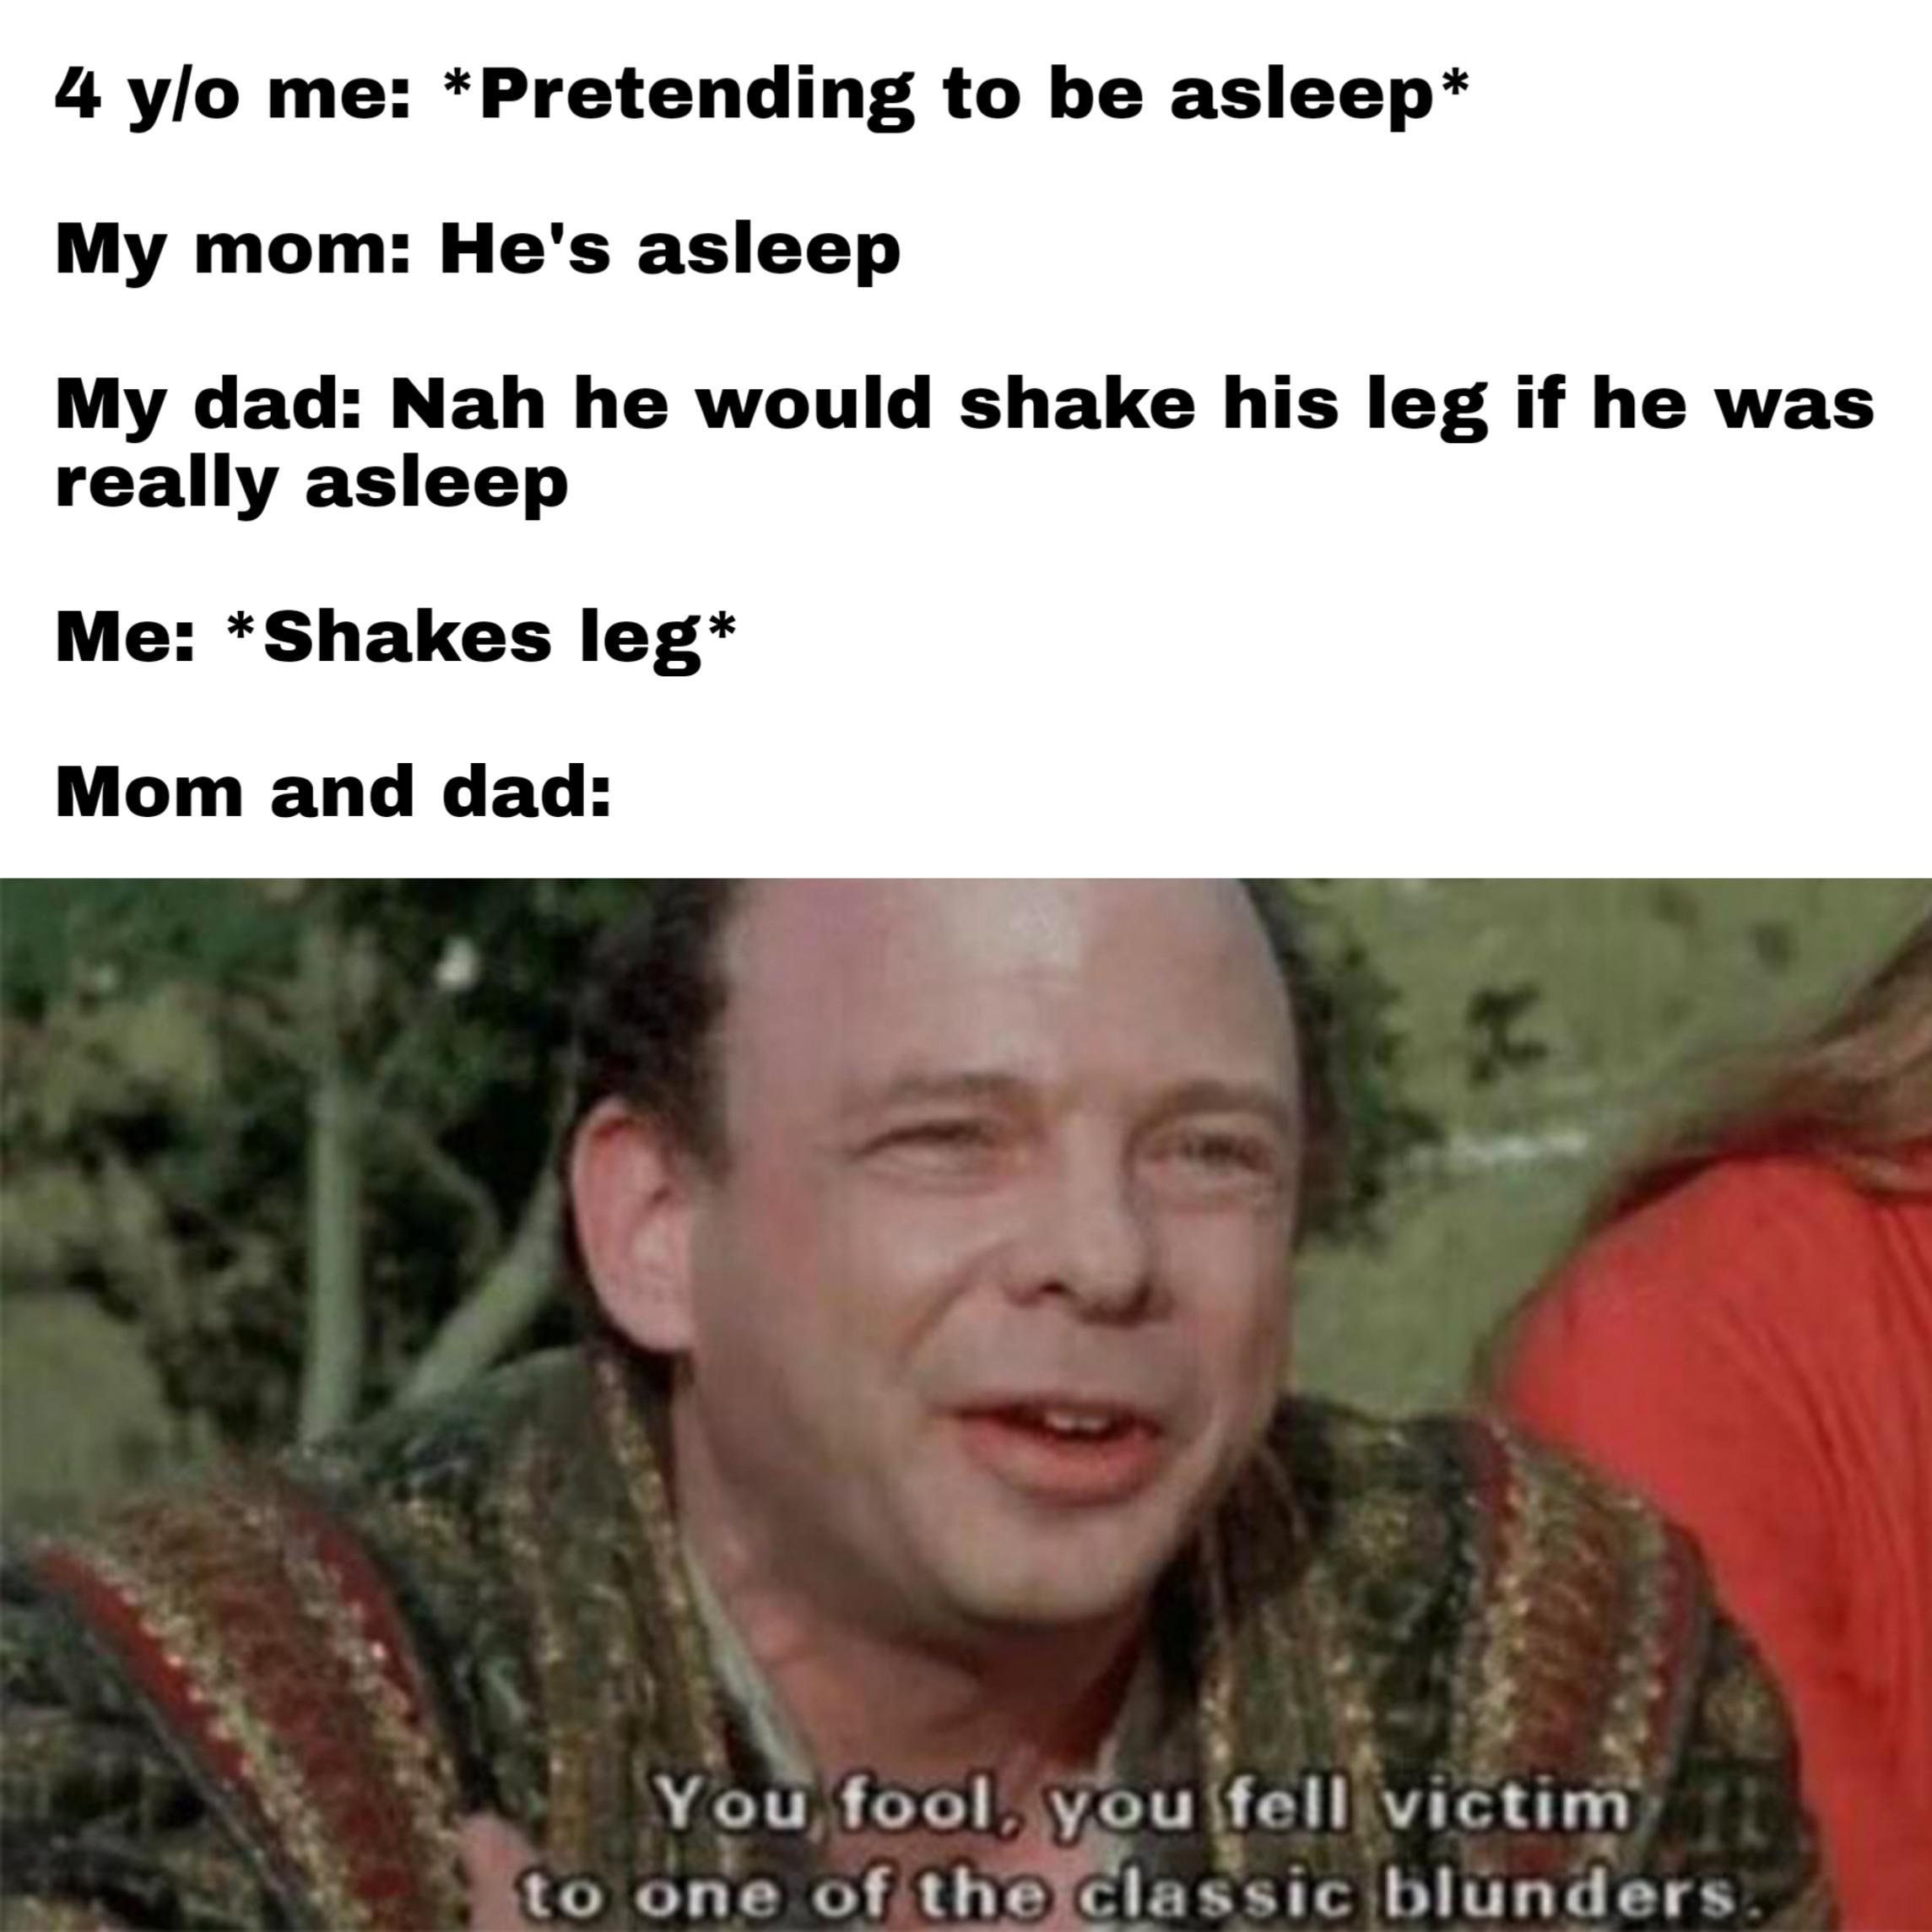 Funny, Laughs, NCONCEIVABLE other memes Funny, Laughs, NCONCEIVABLE text: 4 ylo me: *Pretending to be asleep My mom: He's asleep My dad: Nah he would shake his leg if he was really asleep Me: *Shakes leg Mom and dad: Yoü/ fool, éto one 